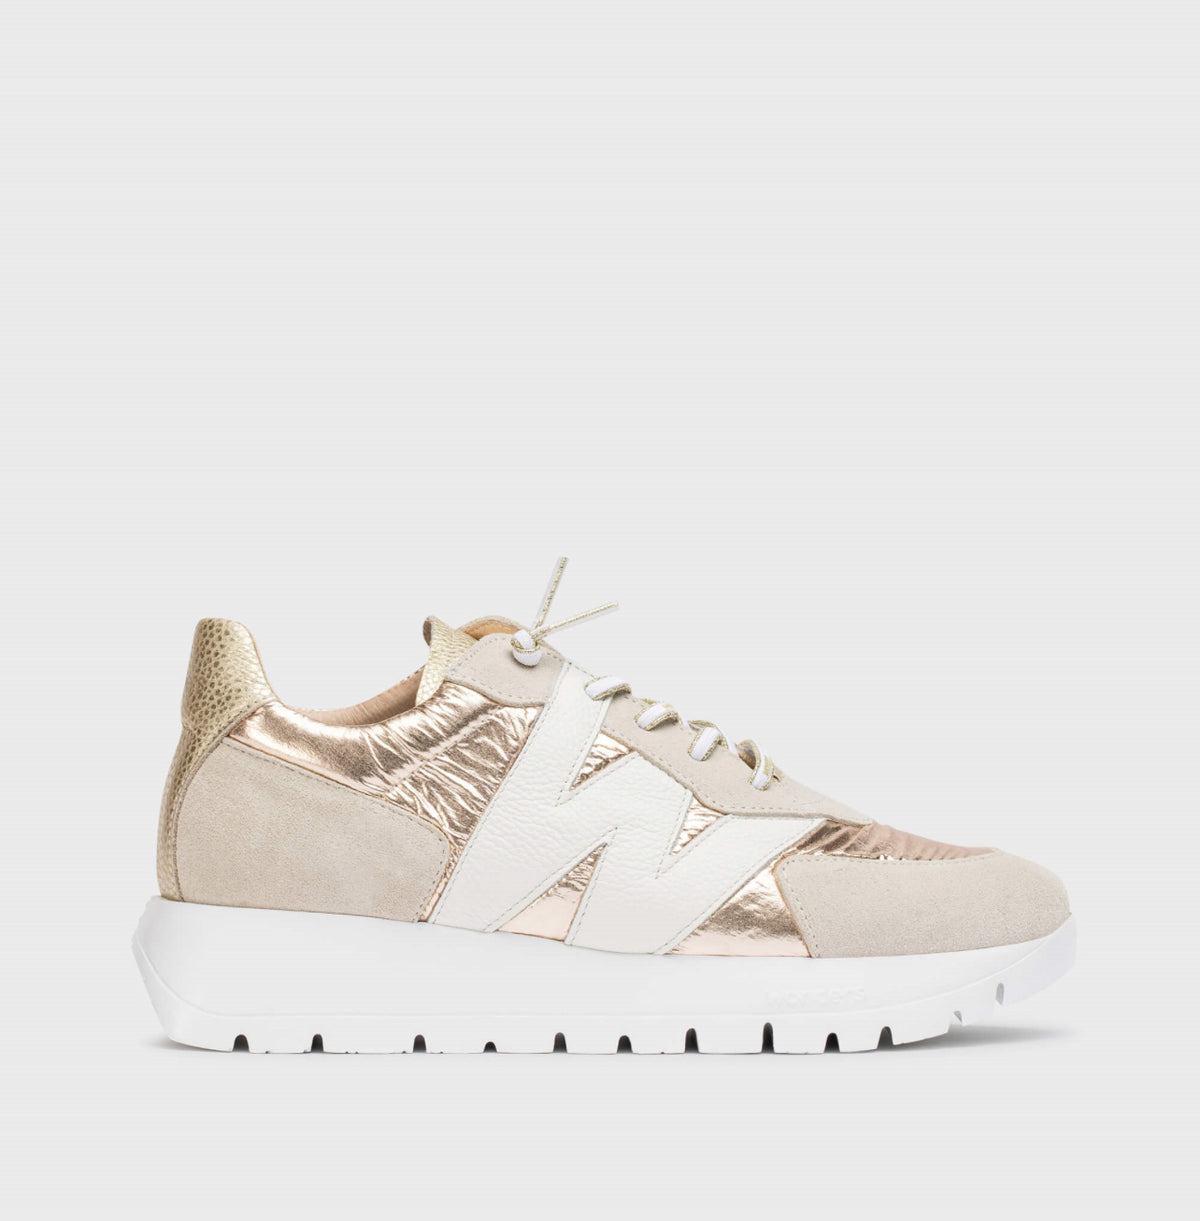 Wonders - A2464 Beige and Rosegold Multi Slip on Trainer